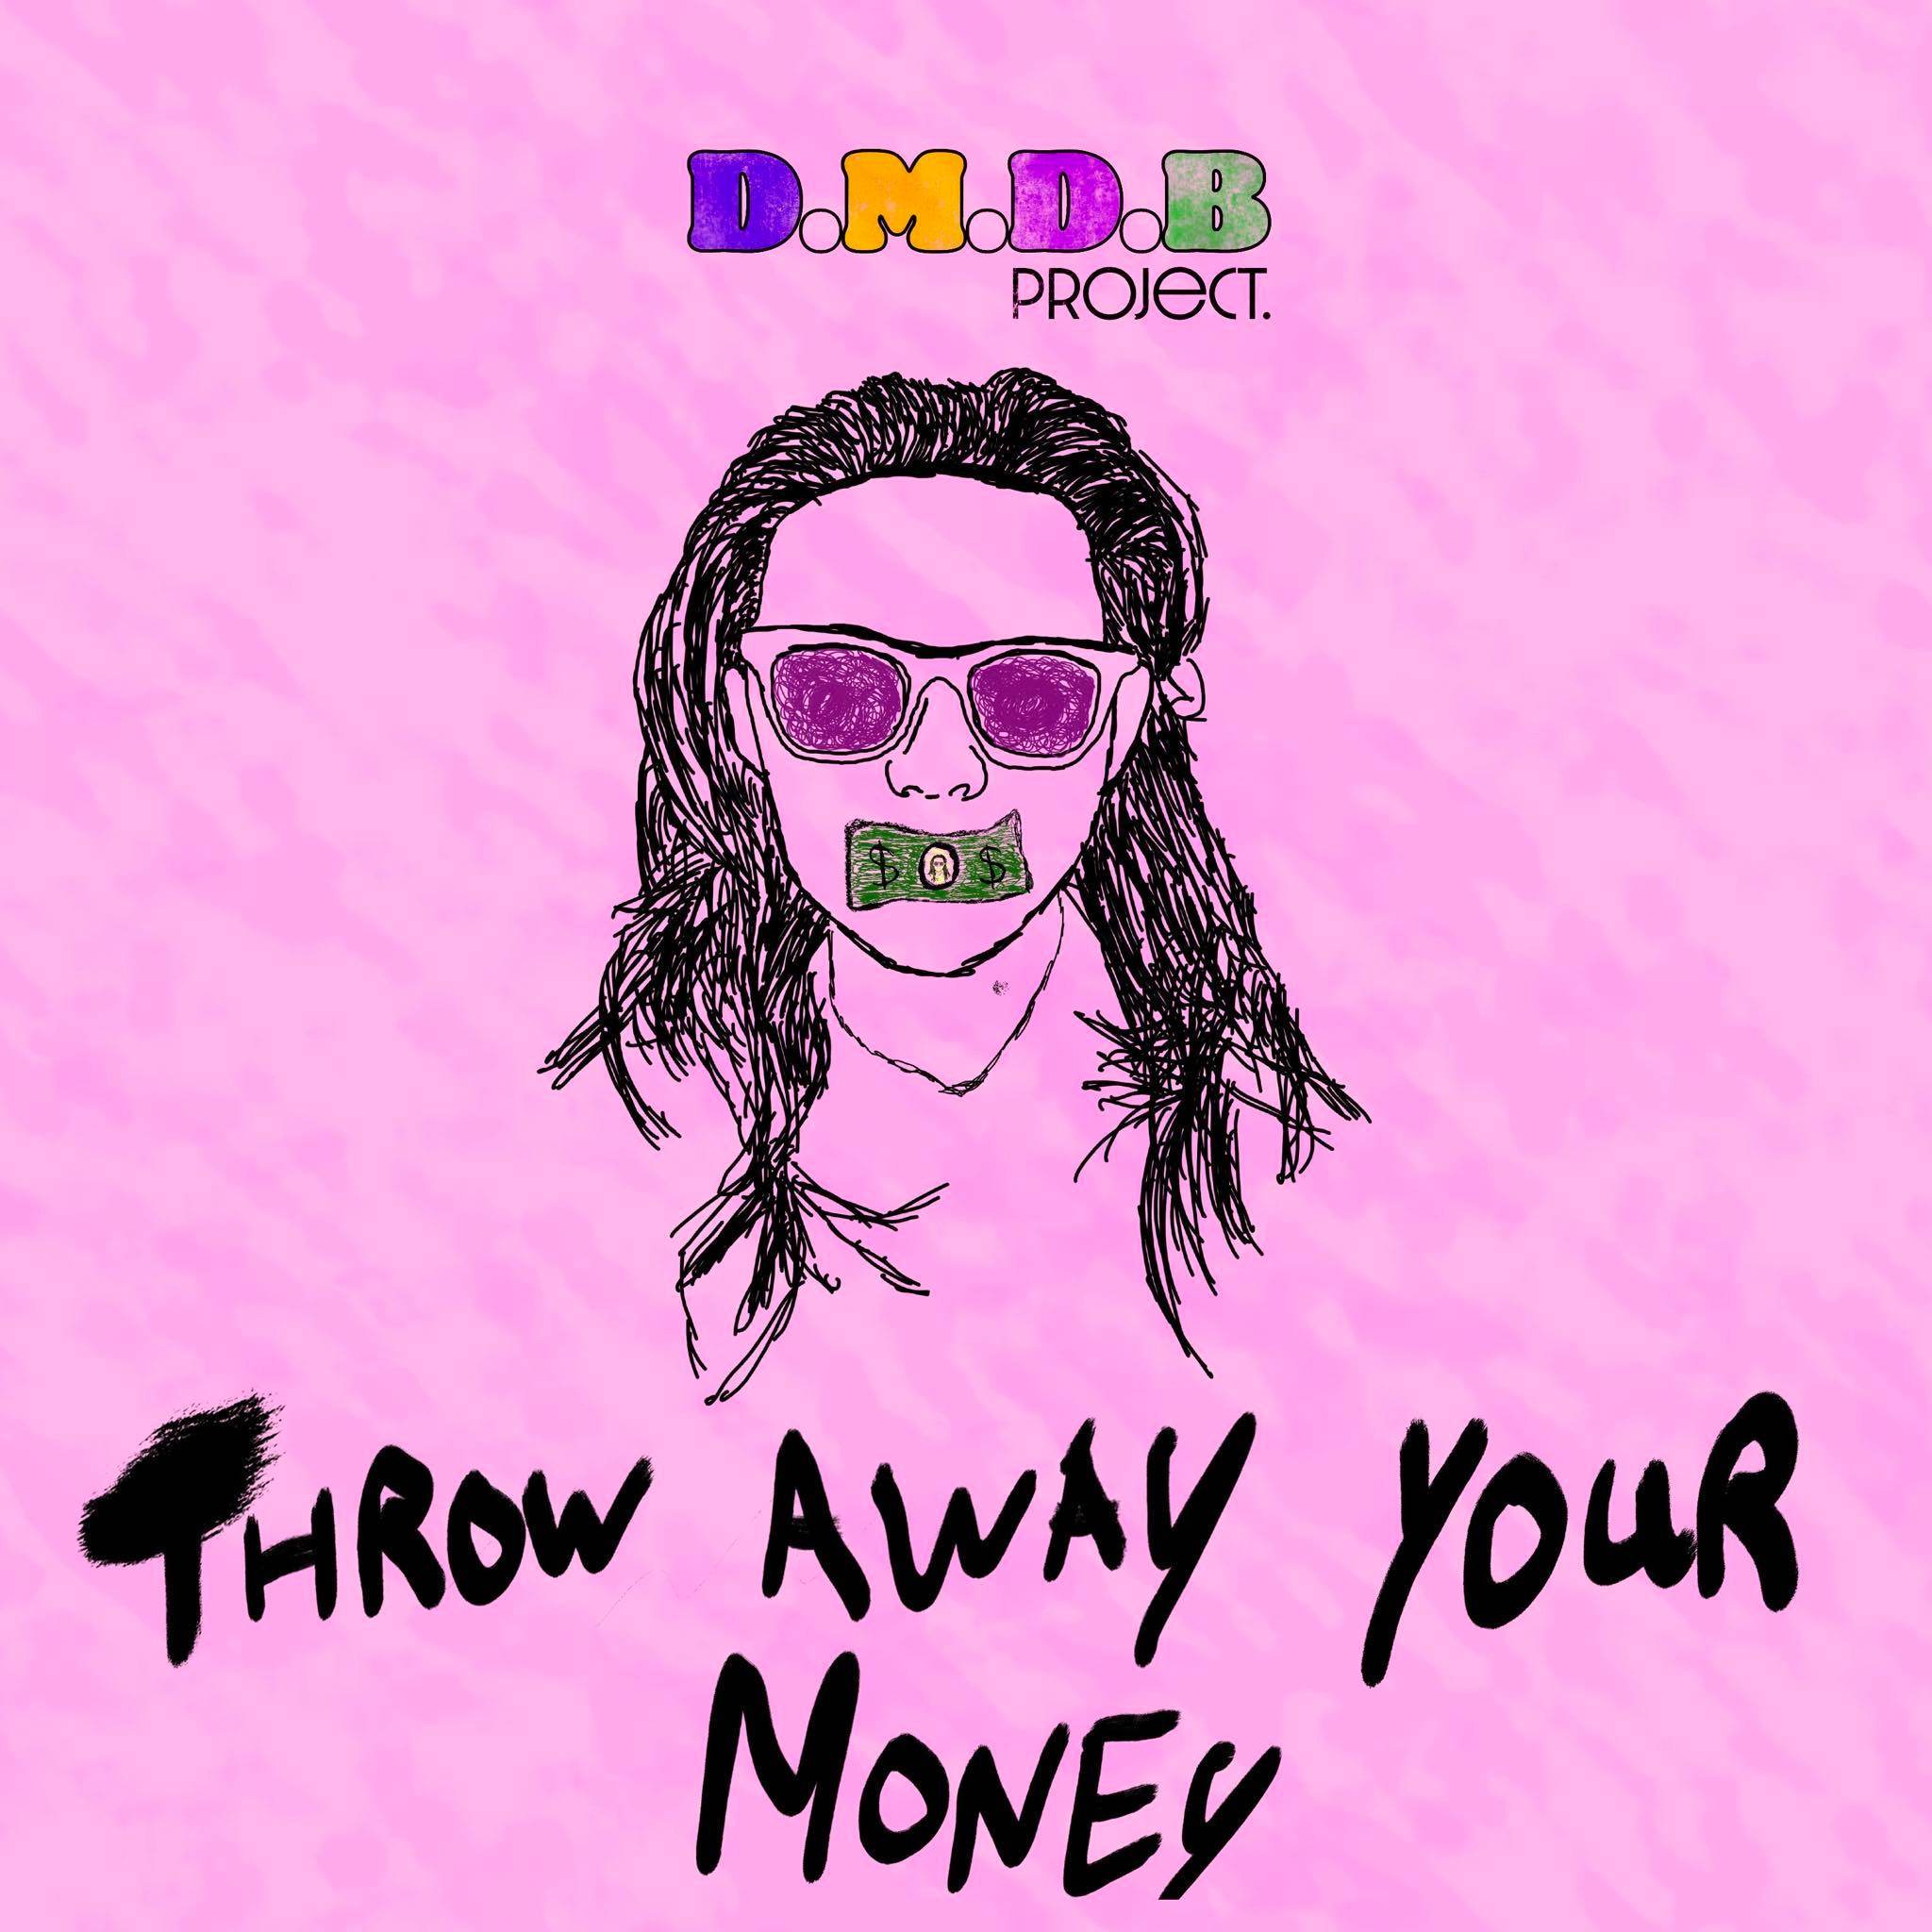 DEBUT SINGLE REVIEW: “Throw Away Your Money” by D.M.D.B Project